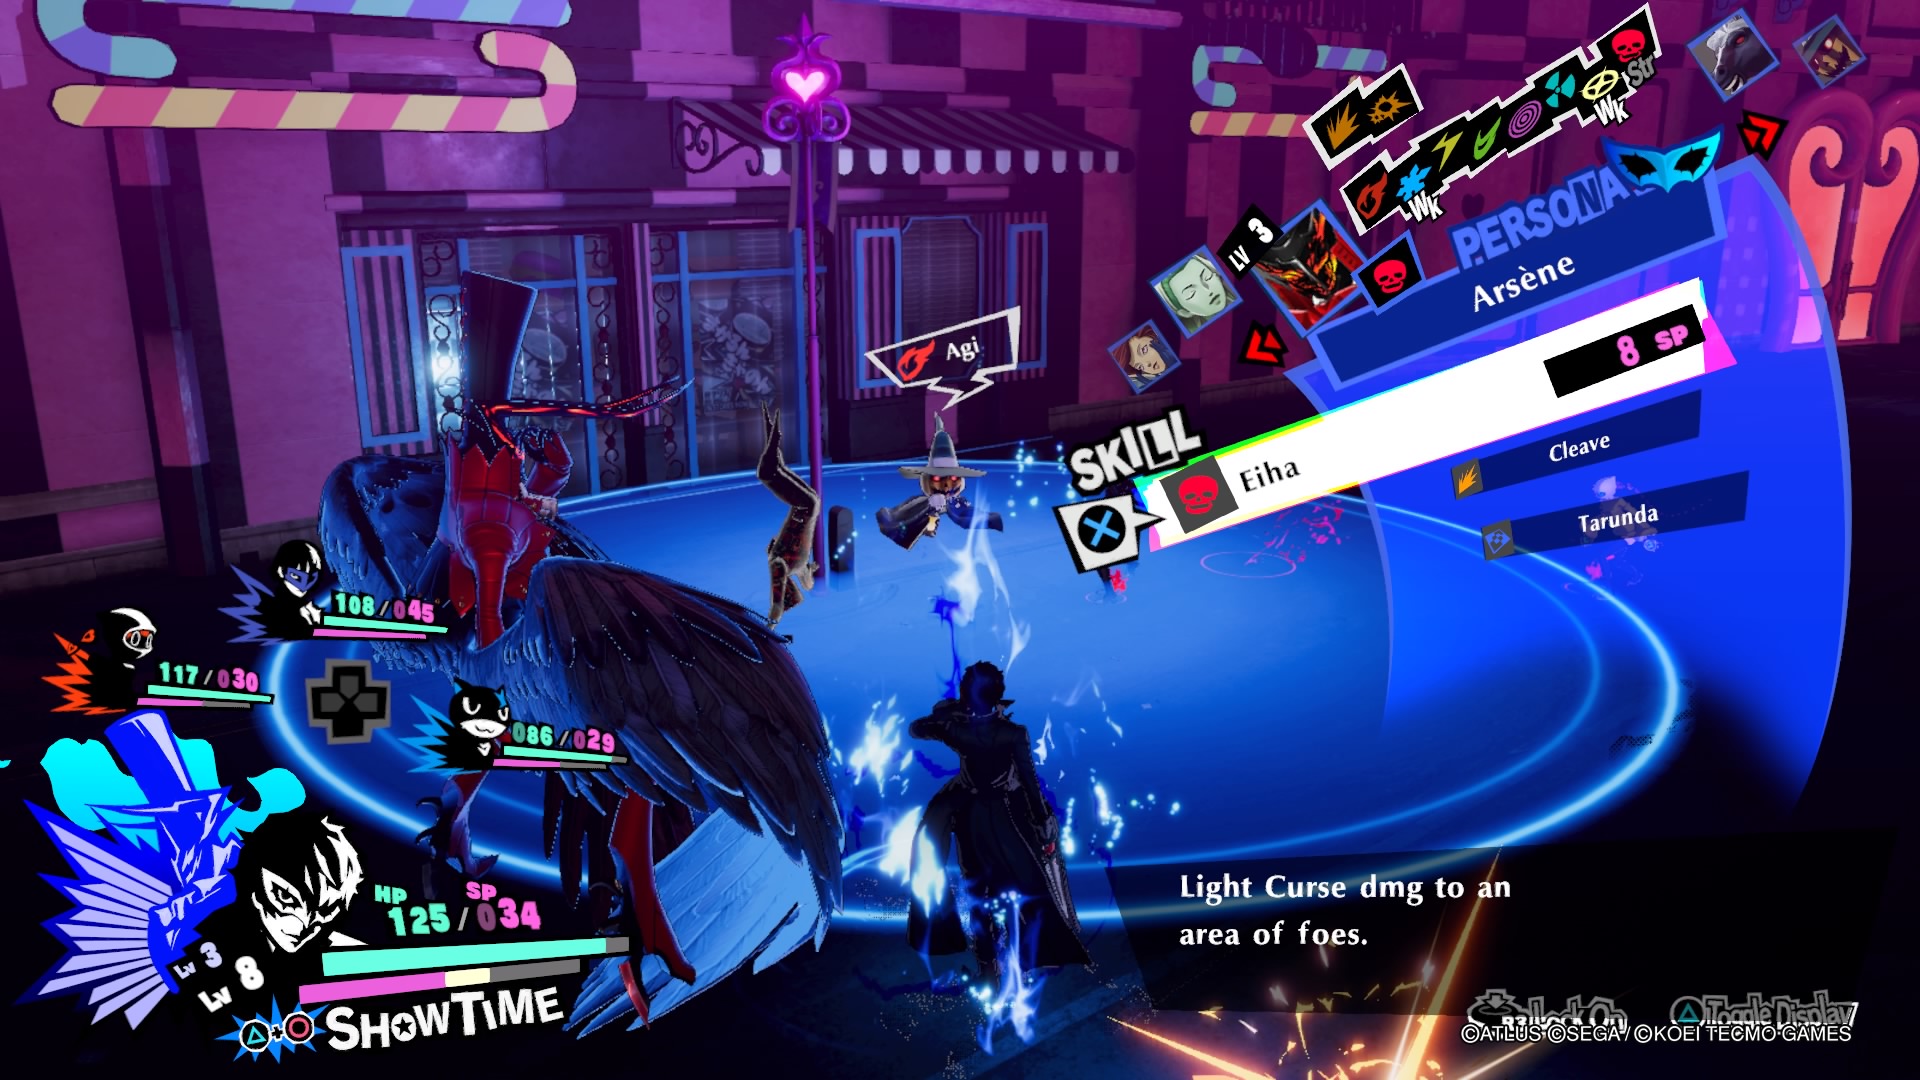 Persona 5 Strikers Hands-on - Phantom Warriors - Checkpoint